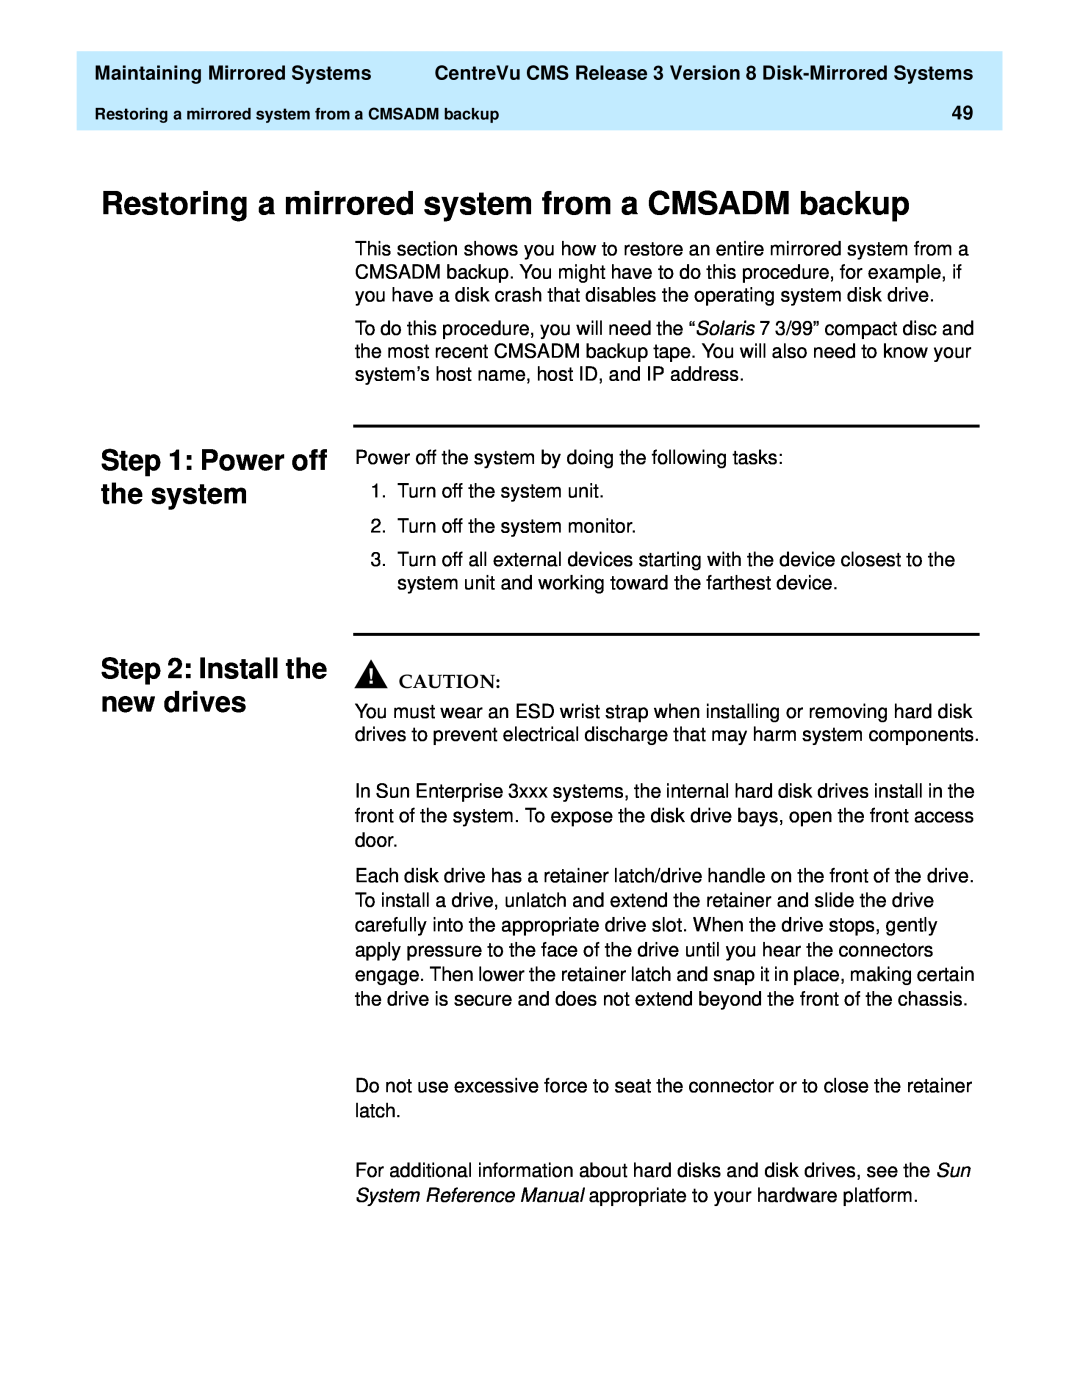 Lucent Technologies 585-210-940 manual Restoring a mirrored system from a CMSADM backup, Power off the system 